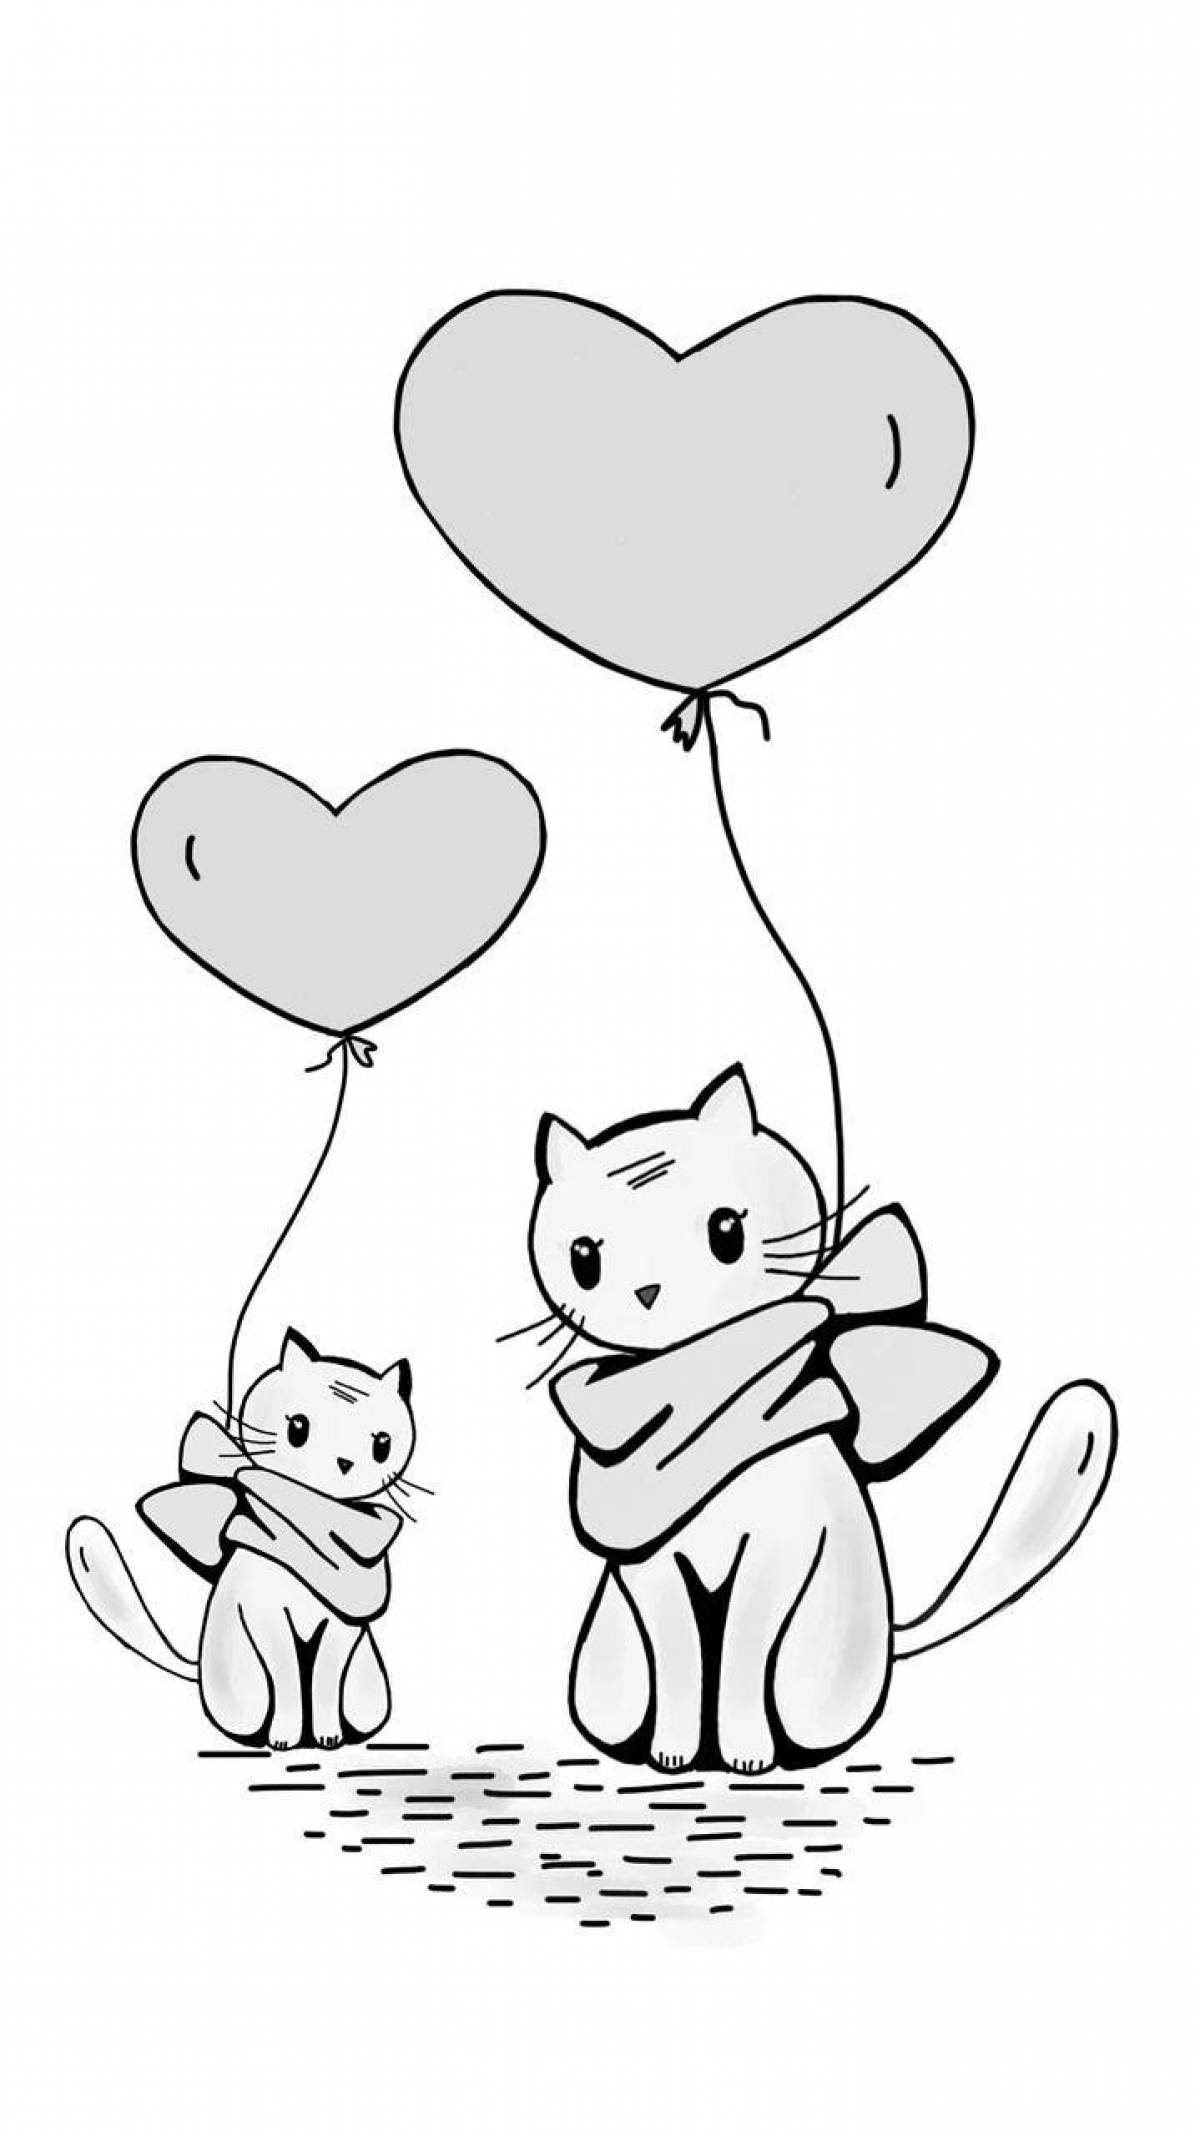 Joyful cat with a heart coloring book